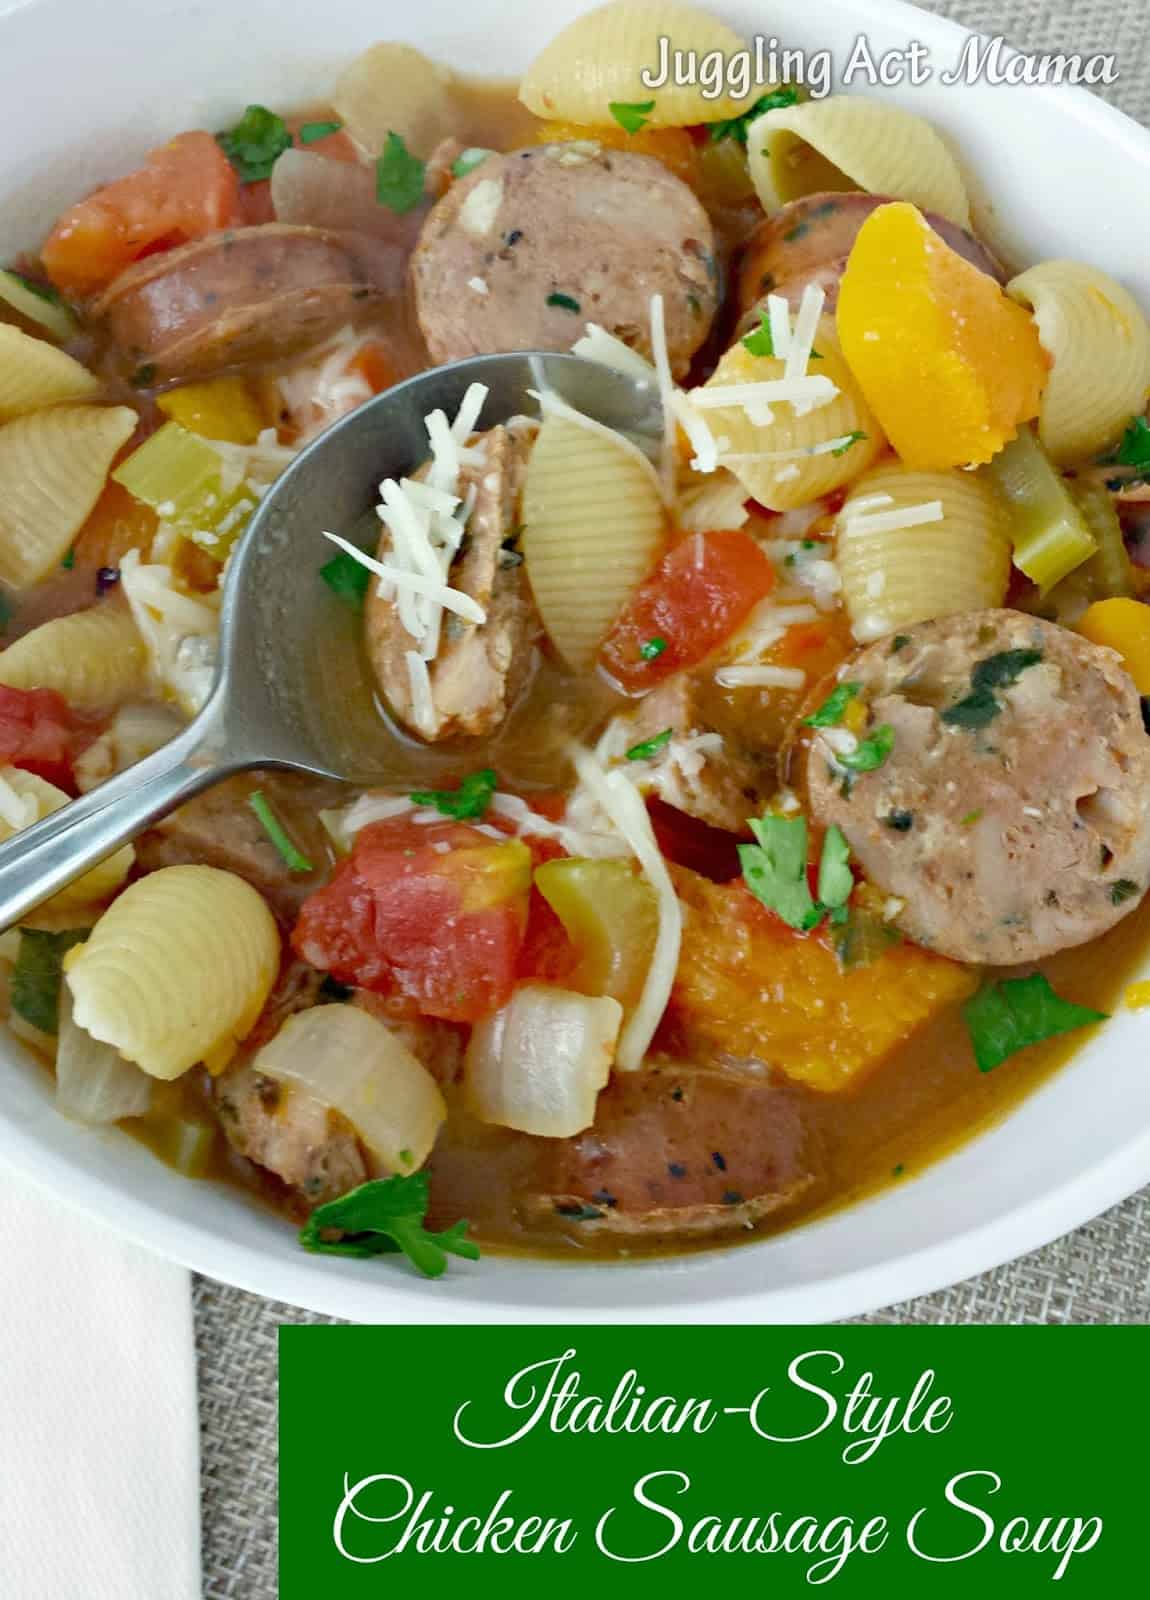 Italian Style Chicken Sausage Soup can be made in a flash on the stovetop, or can simmer away all day in slow cooker. Either way it's a hearty and delicious family meal!